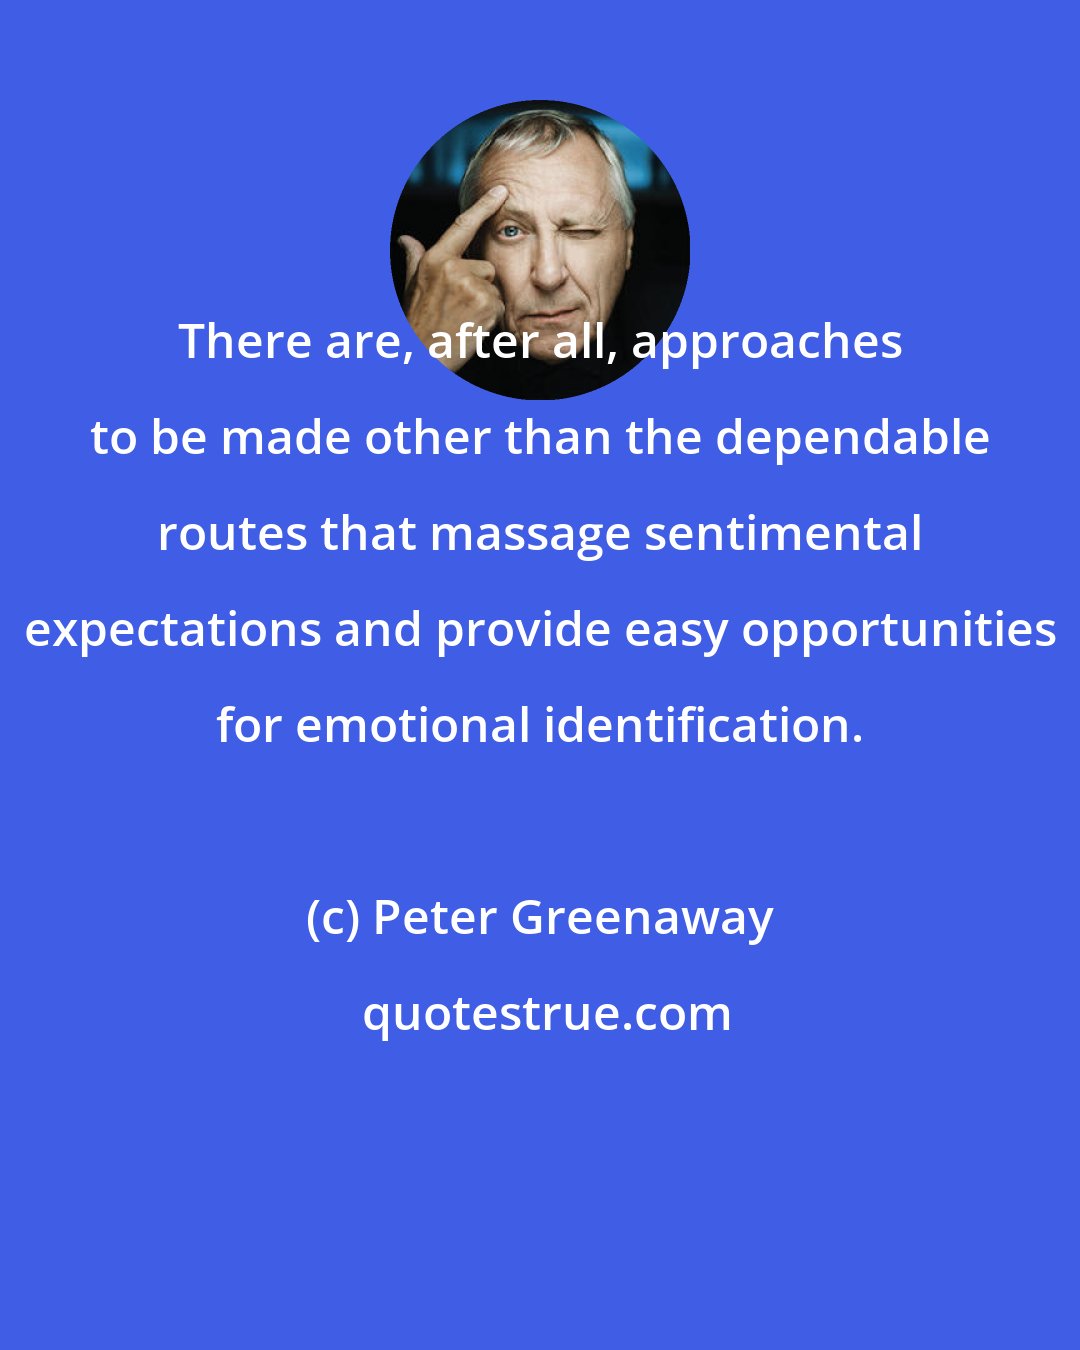 Peter Greenaway: There are, after all, approaches to be made other than the dependable routes that massage sentimental expectations and provide easy opportunities for emotional identification.